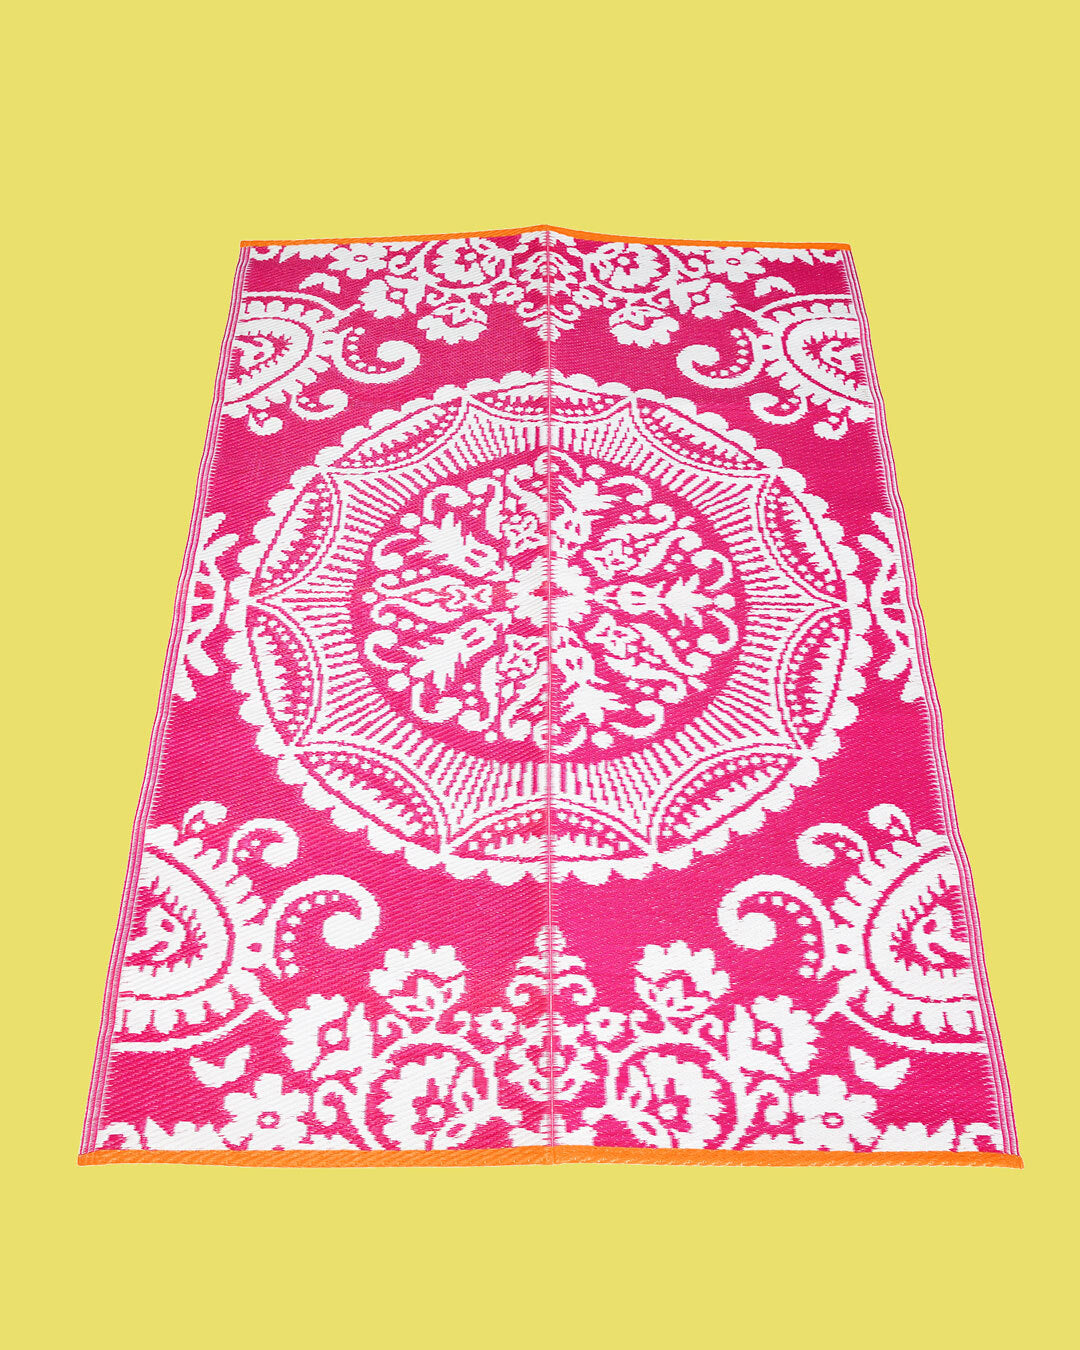 180x120cm Recycled Floor Mat, Pink